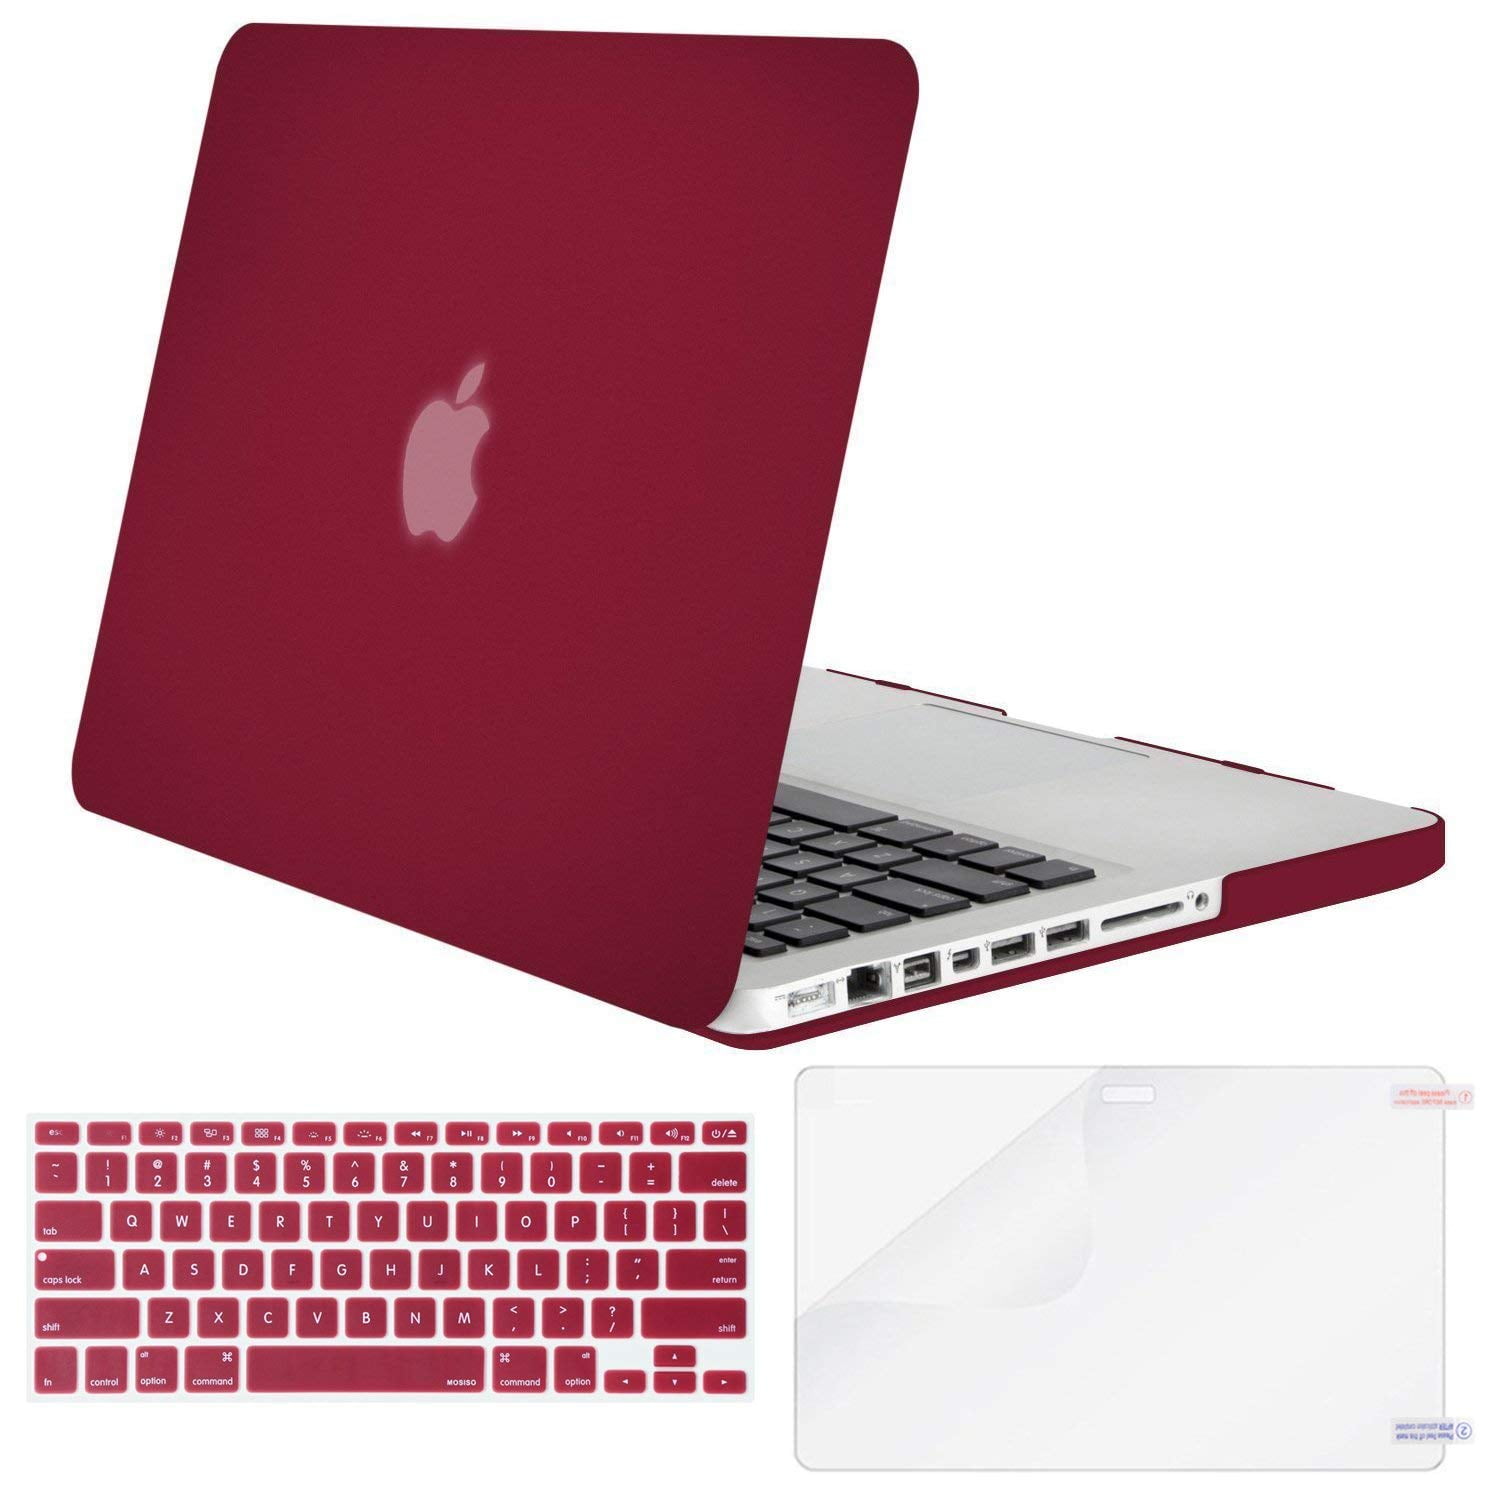 Easygoby 3in1 Case For Retina 13-Inch + Keyboard Cover Fits Model: A1502 / A1425 Matte Silky-Smooth Soft-Touch Hard Shell Case Cover For MacBook Pro 13.3 With Retina Display NO CD-ROM Drive Screen Protector- Deep Purple